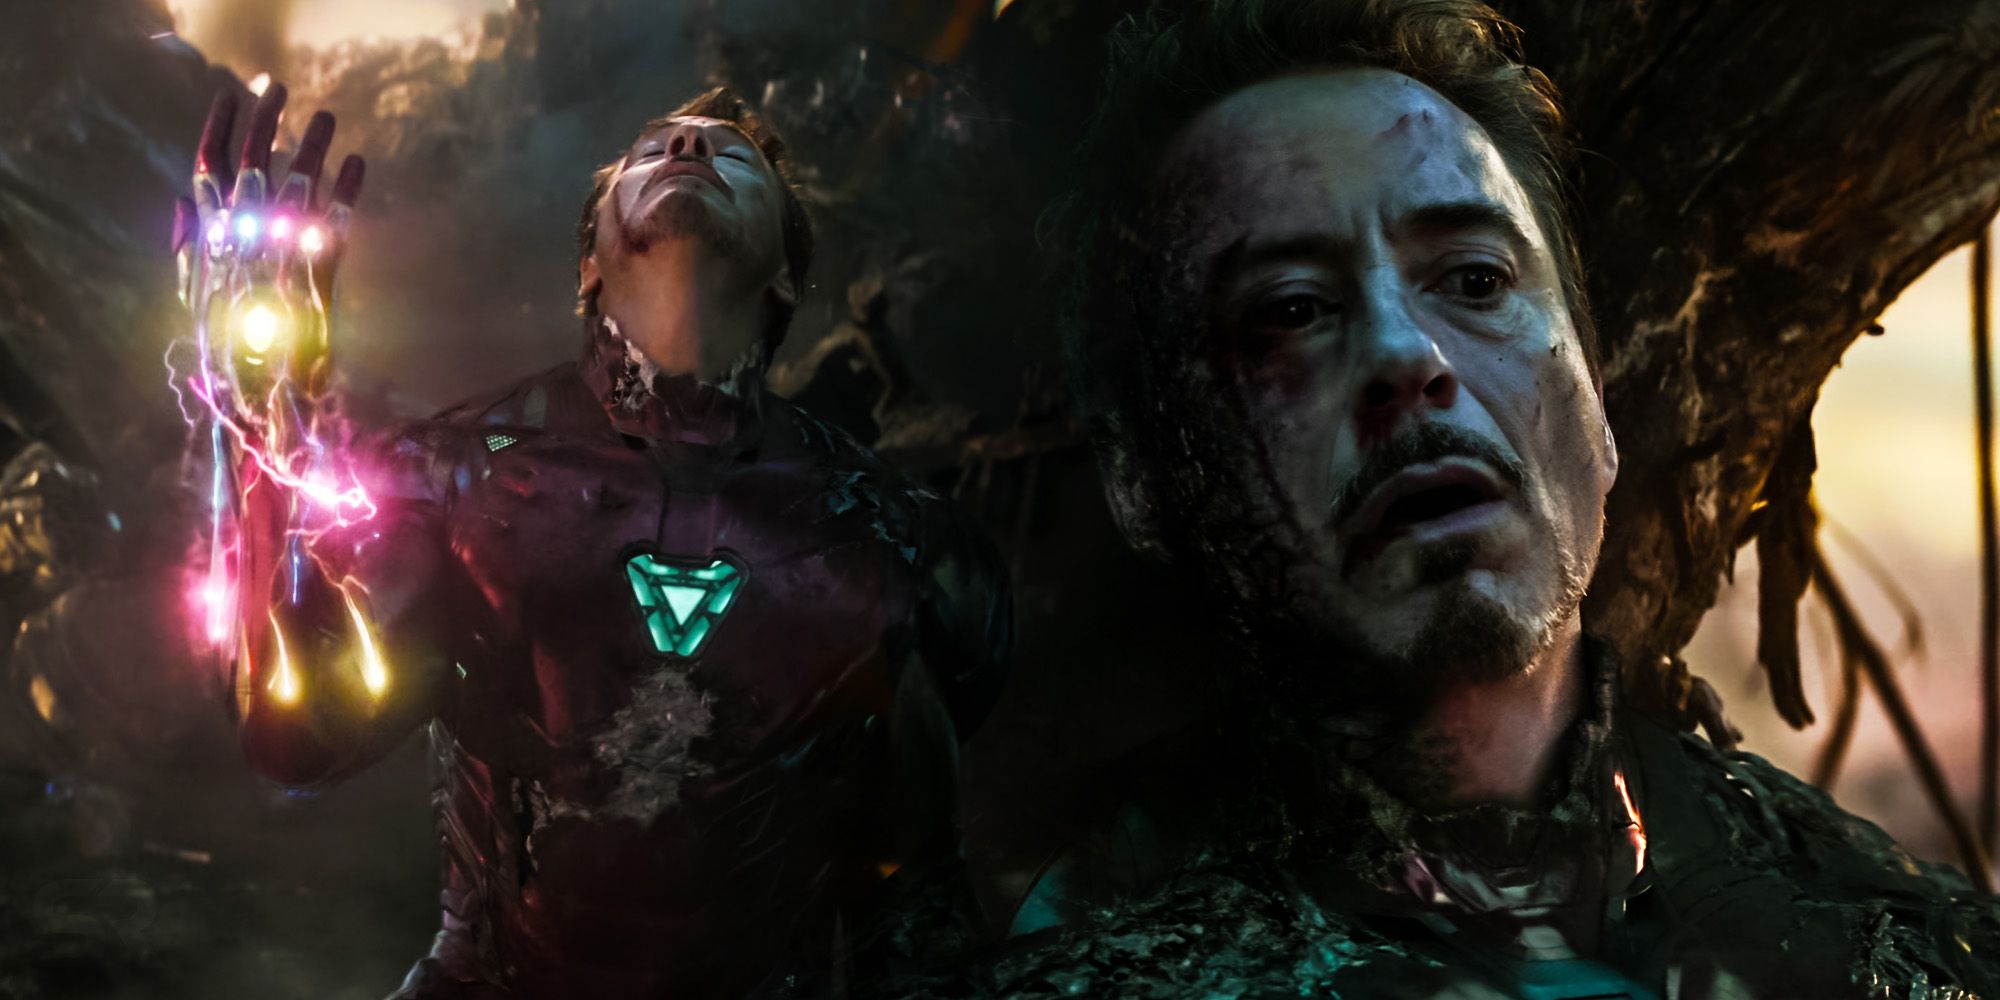 Custom image of Iron Man's snap and death in Avengers: Endgame.